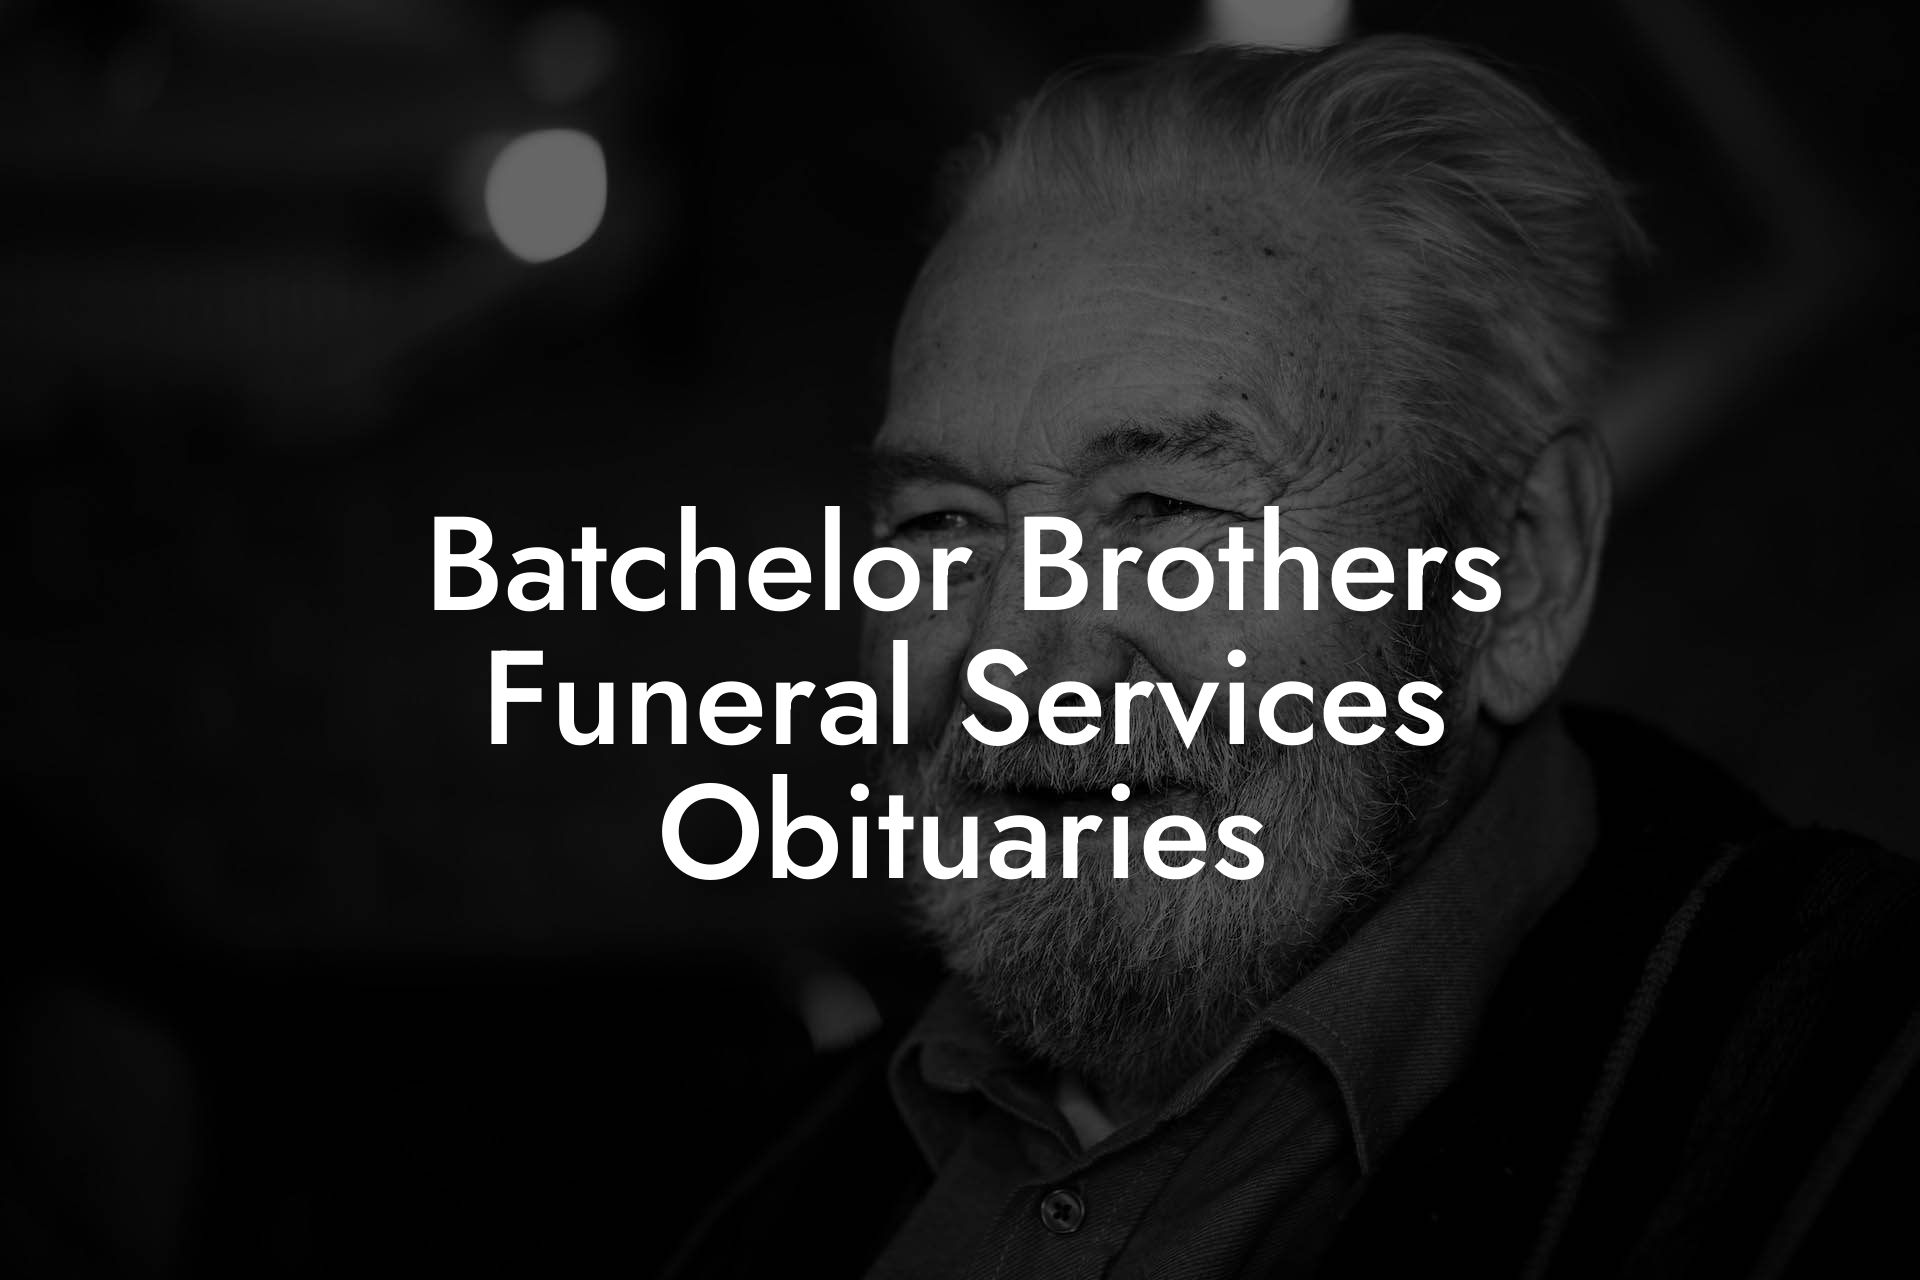 Batchelor Brothers Funeral Services Obituaries